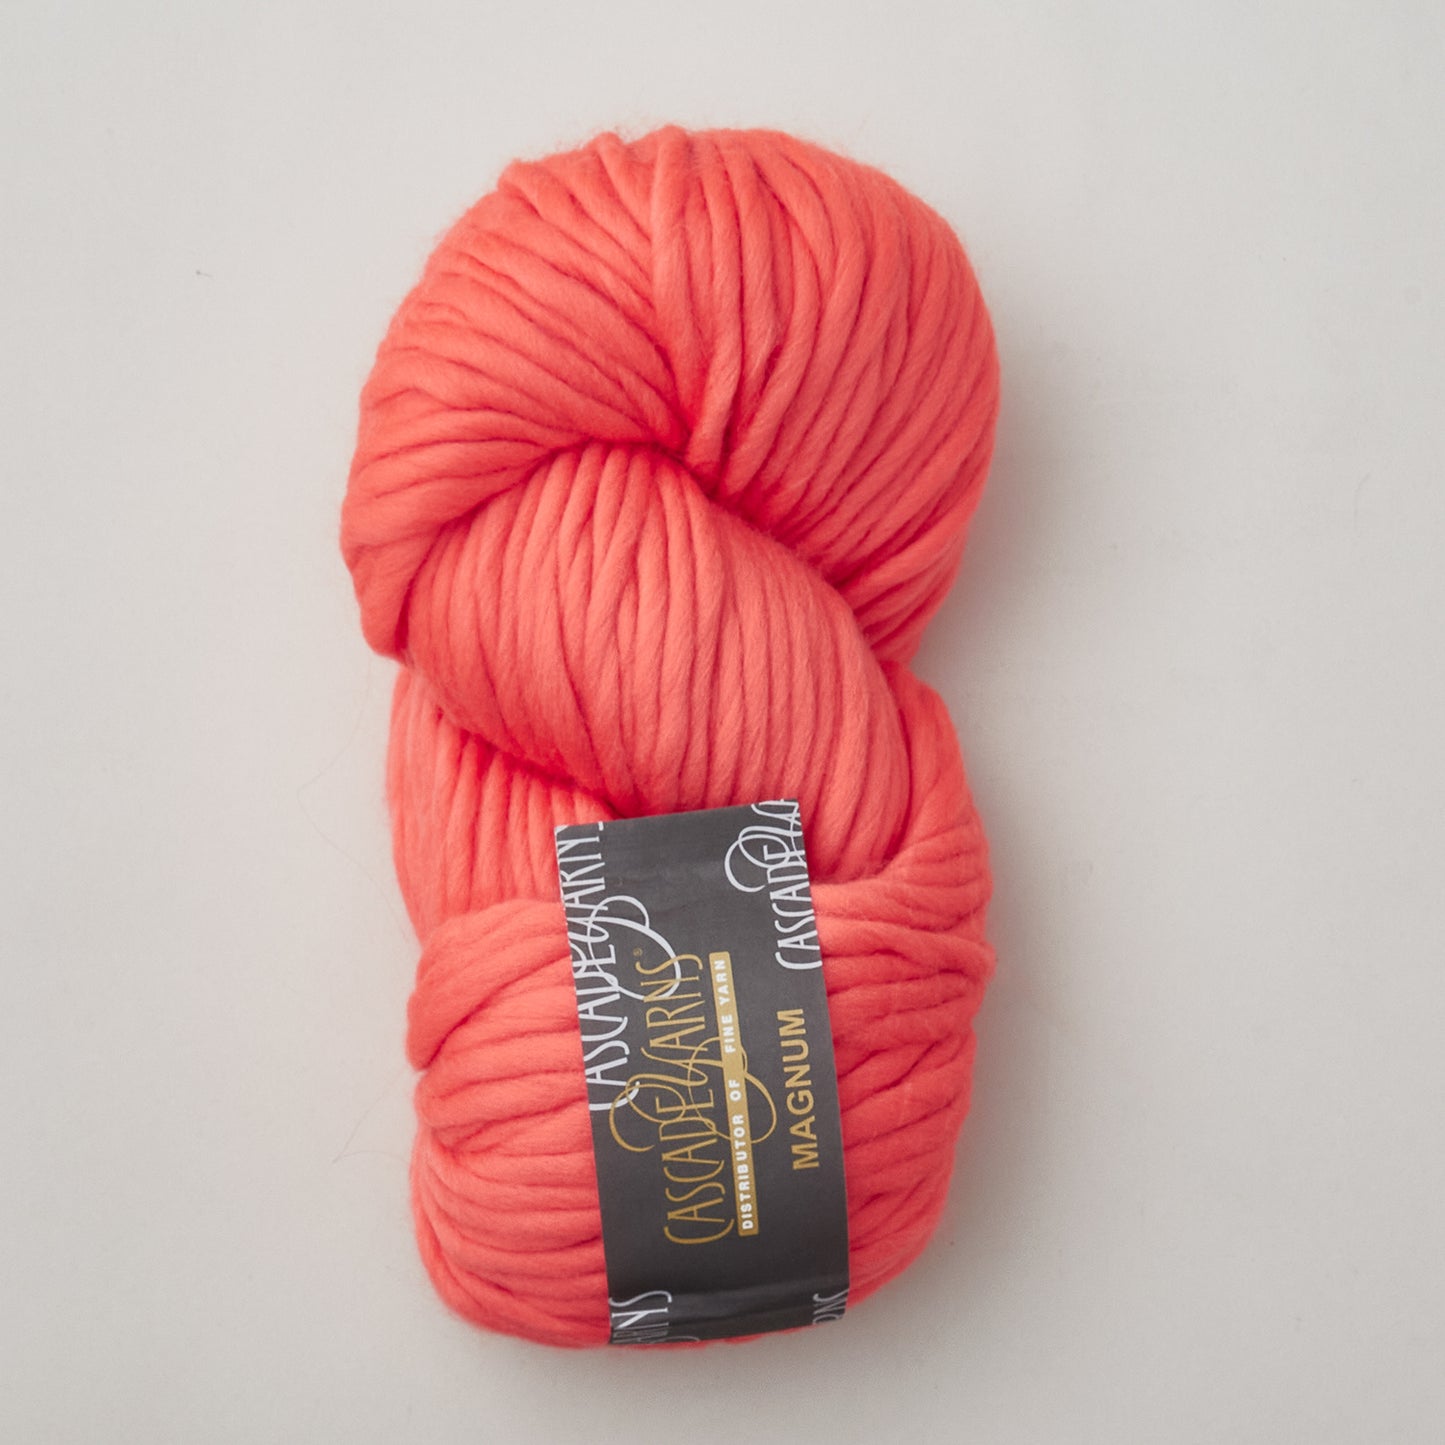 Crescent Hill Shawl Knit Kit - Living Coral Alternative View #1